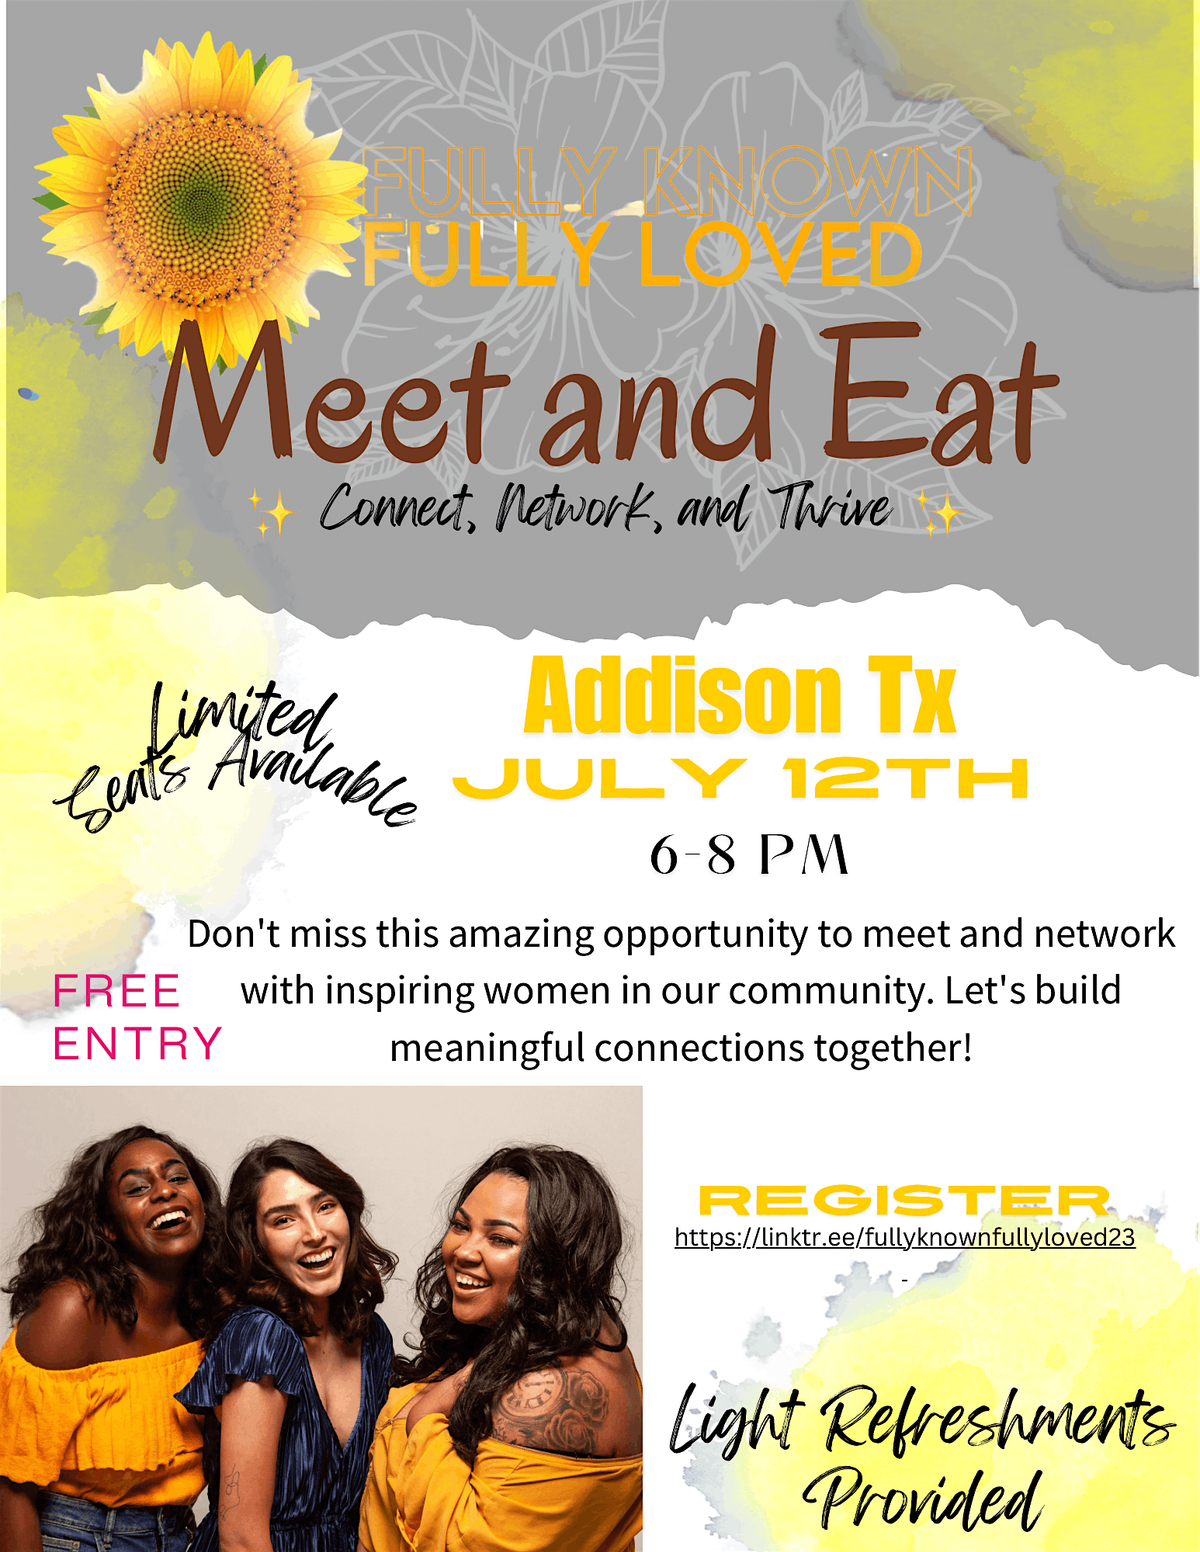 MEET AND EAT